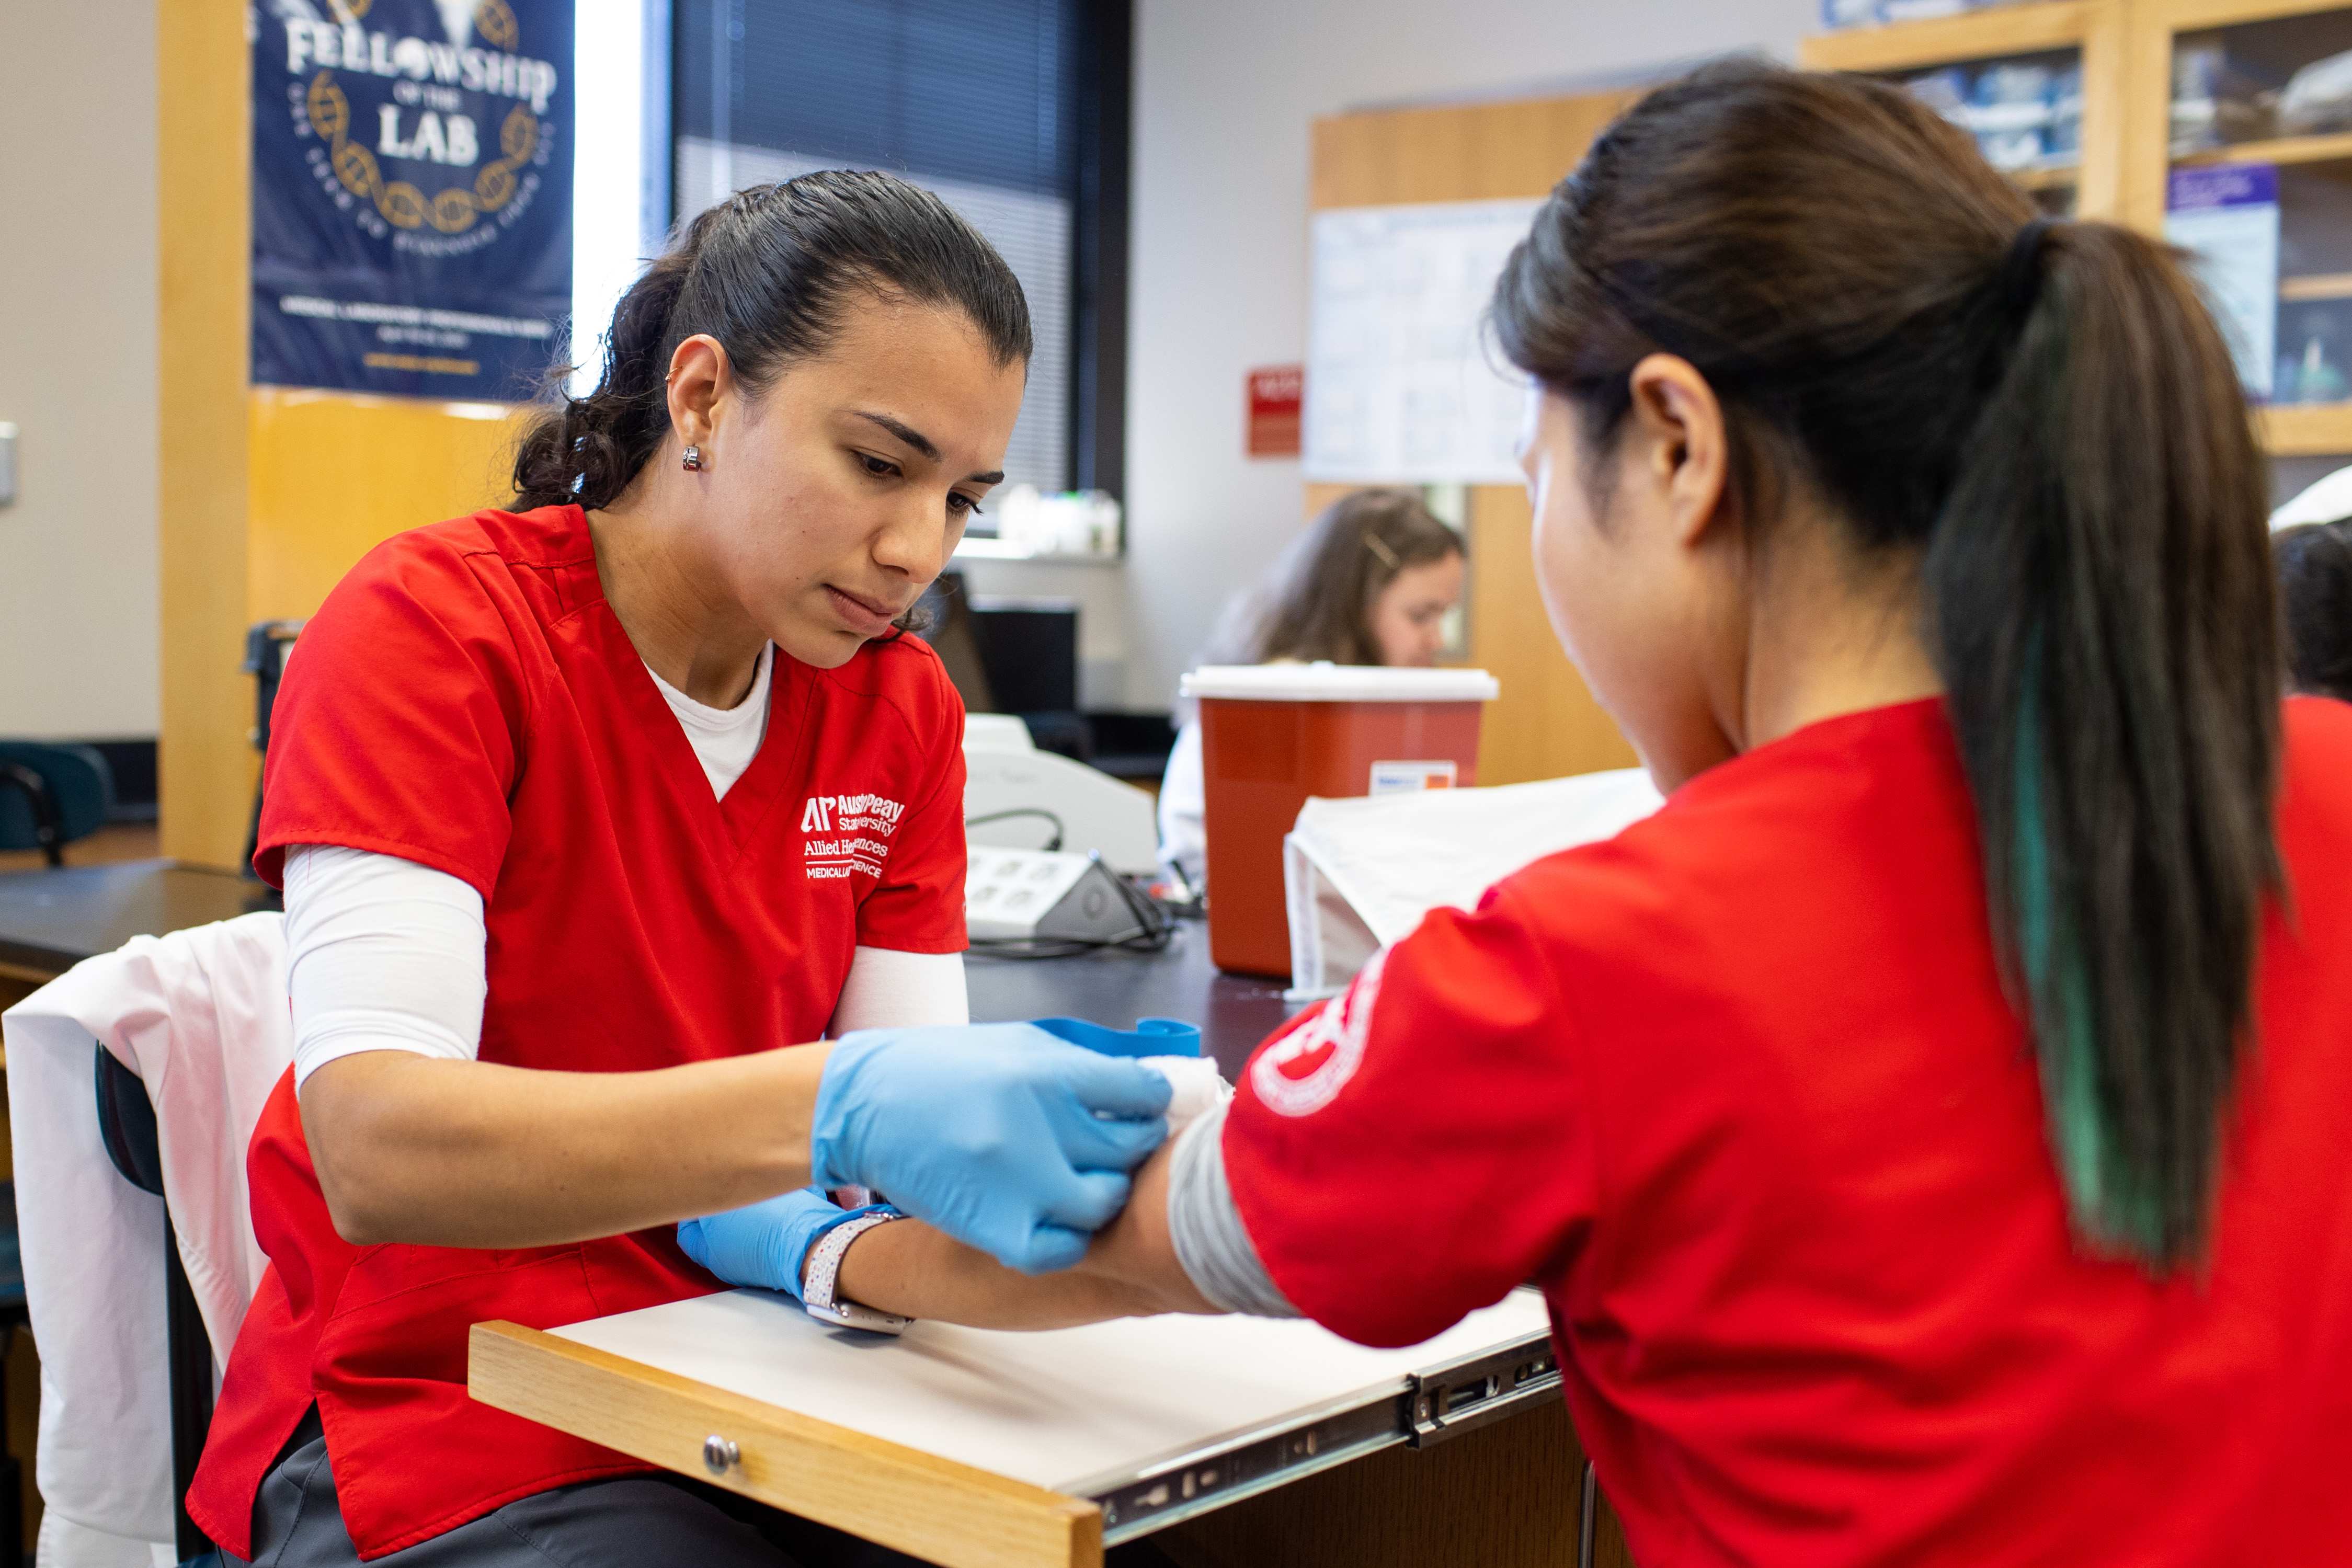 Allied Health Sciences students practiced taking blood samples during Professor Jane Semler’s Medical Technology 4971 class on Tuesday, Sept. 13. 